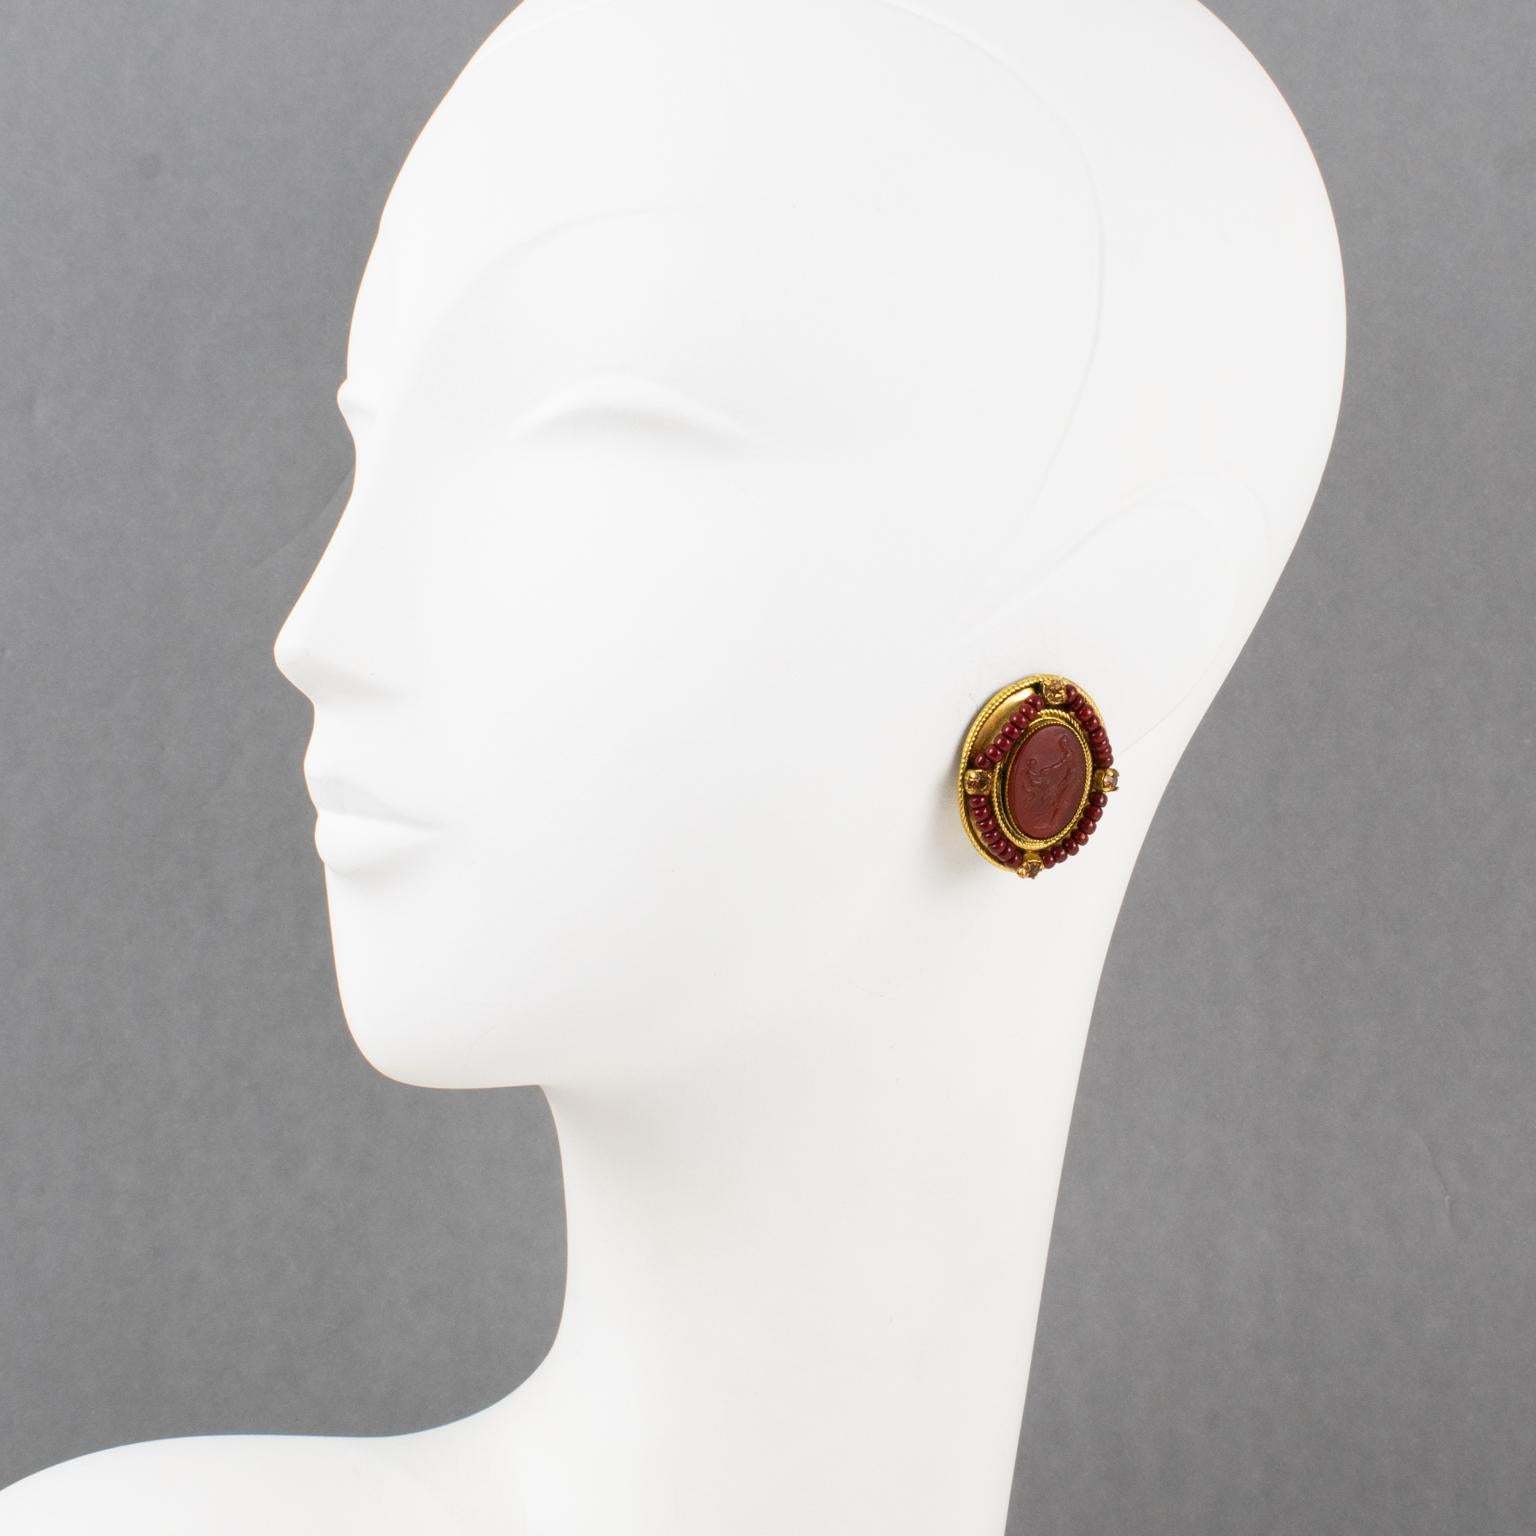 These thrilling Zoe Coste for Reminiscence gilt metal clip-on earrings feature gorgeous Victorian-style poured glass cameos mounted on an oval gilded metal framing and adorned with carnelian red seed beads and yellow topaz crystal rhinestones. The